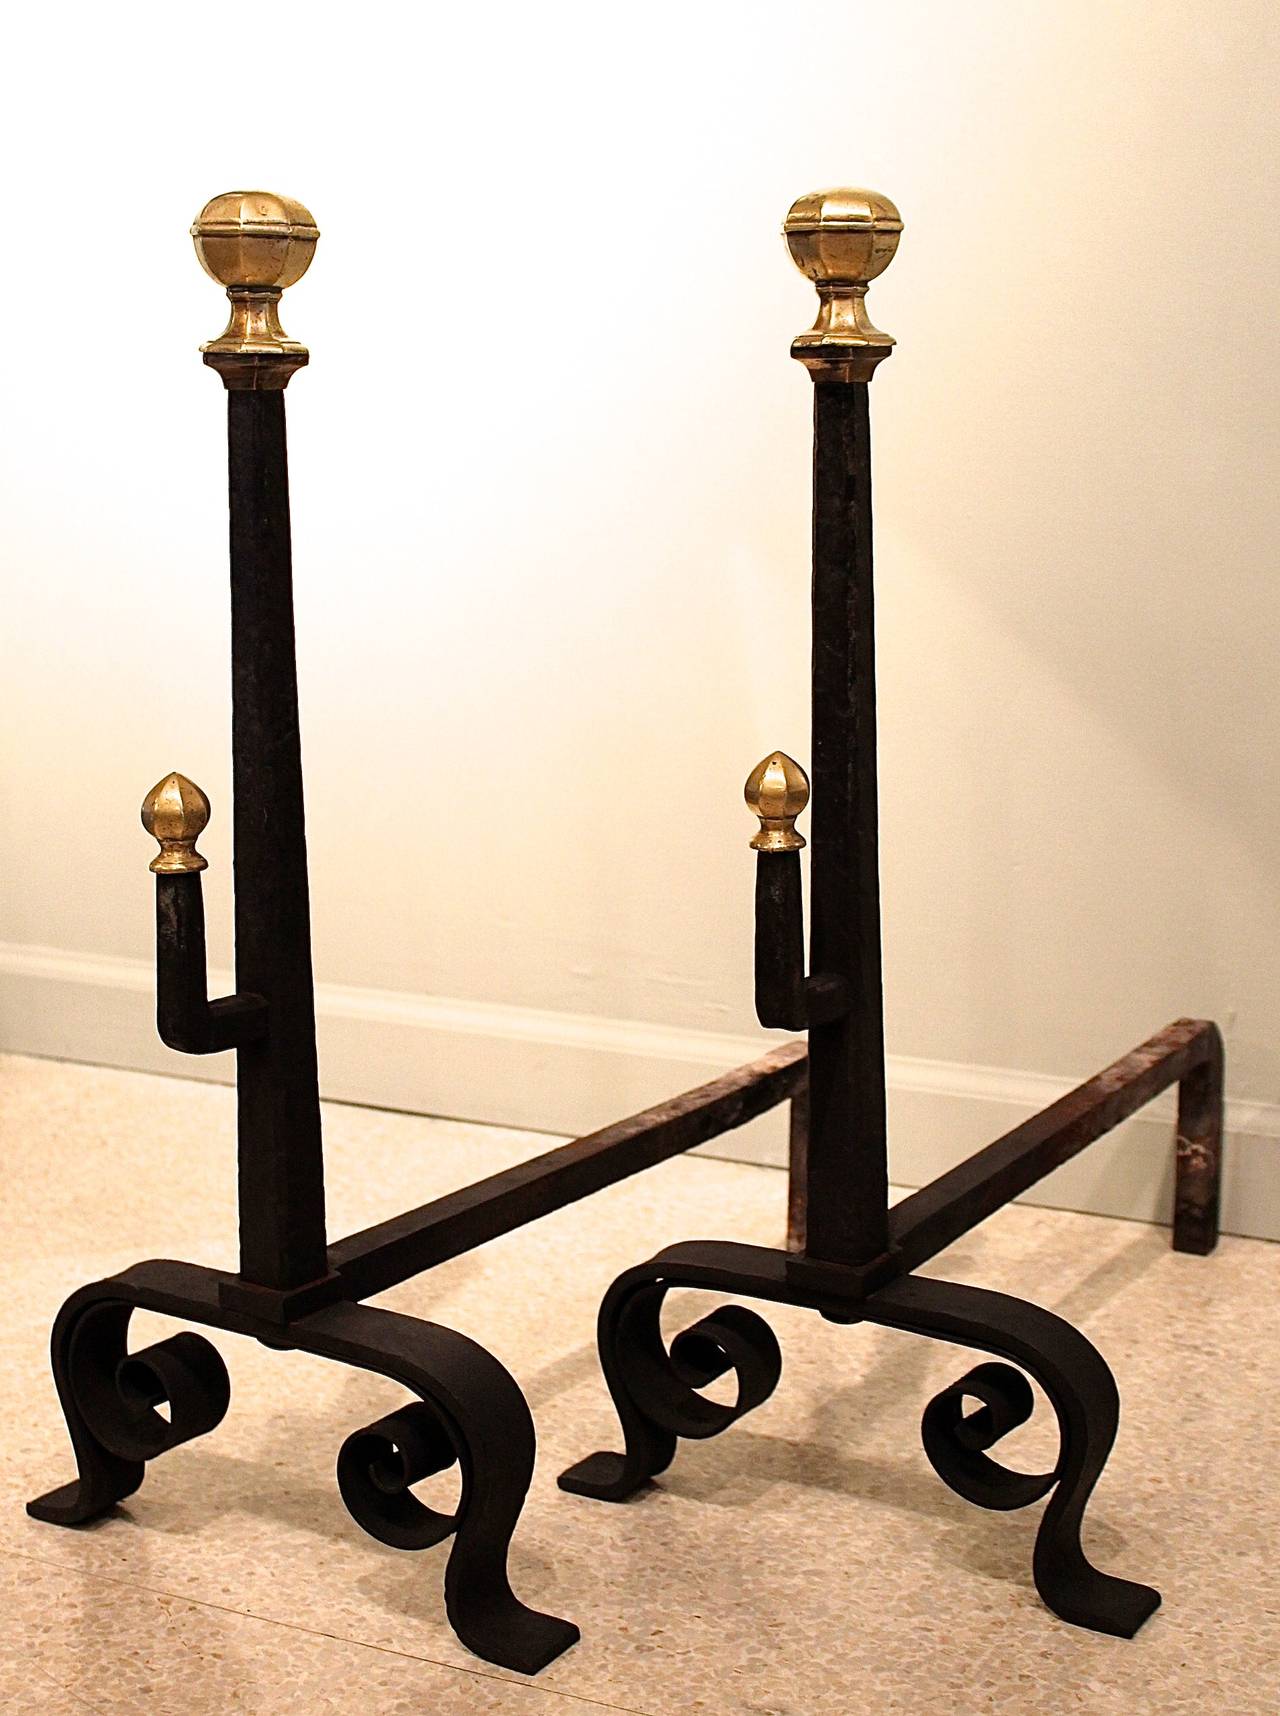 A fine pair of ca. 1900 English Arts and Crafts era andirons of wrought iron, the guards resting on scroll feet and with hooks in front for holding a roasting spit or other implements. Attractive faceted and moulded finials top the guards and hooks.